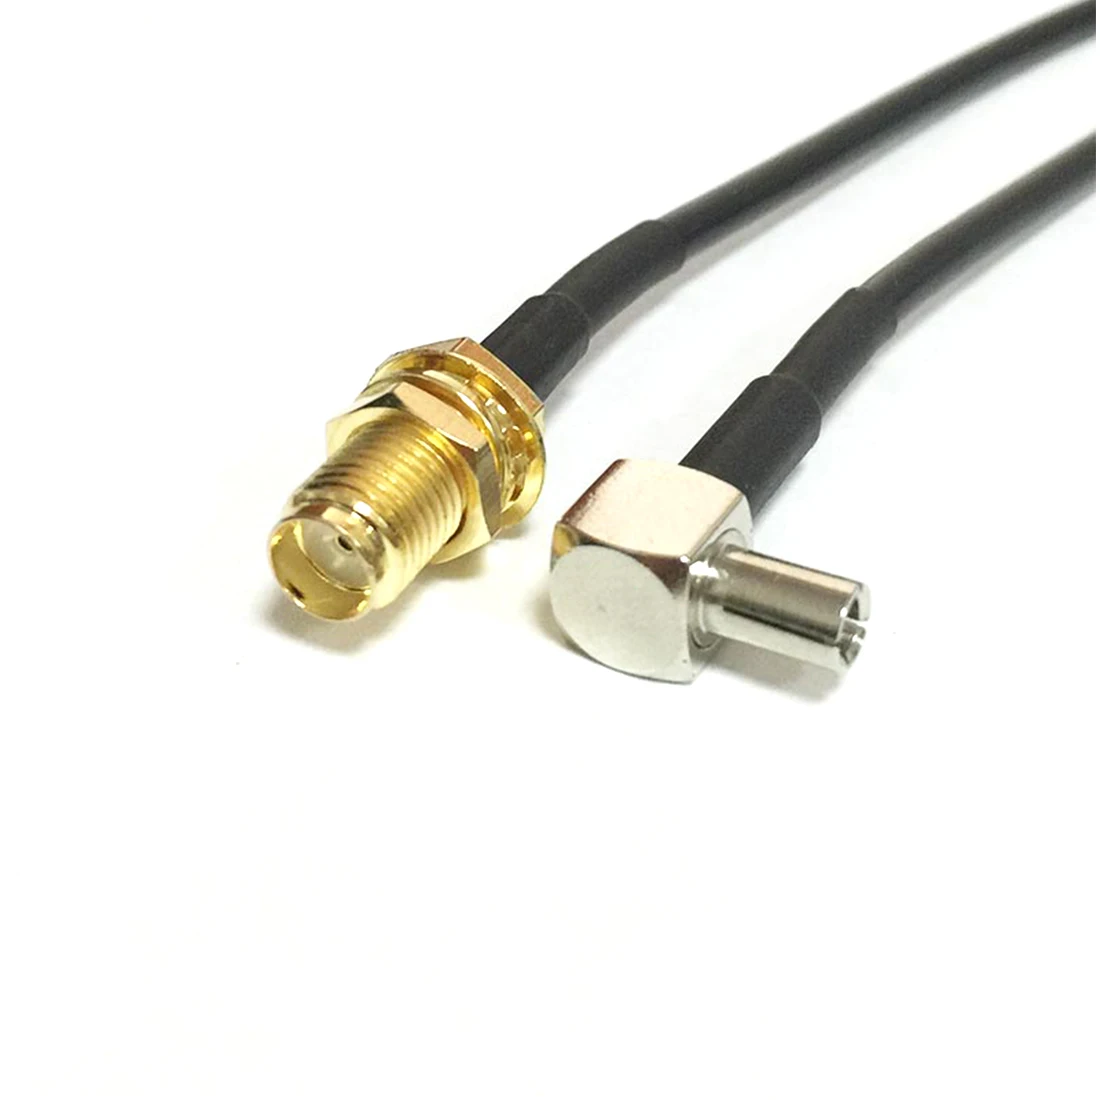 SMA Male Female Plug Jack to TS9 Right Angle Pigtail Cable RG174 10cm/20cm/30cm/50cm/100cm for 3G 4G ZTE USB Modem NEW images - 6